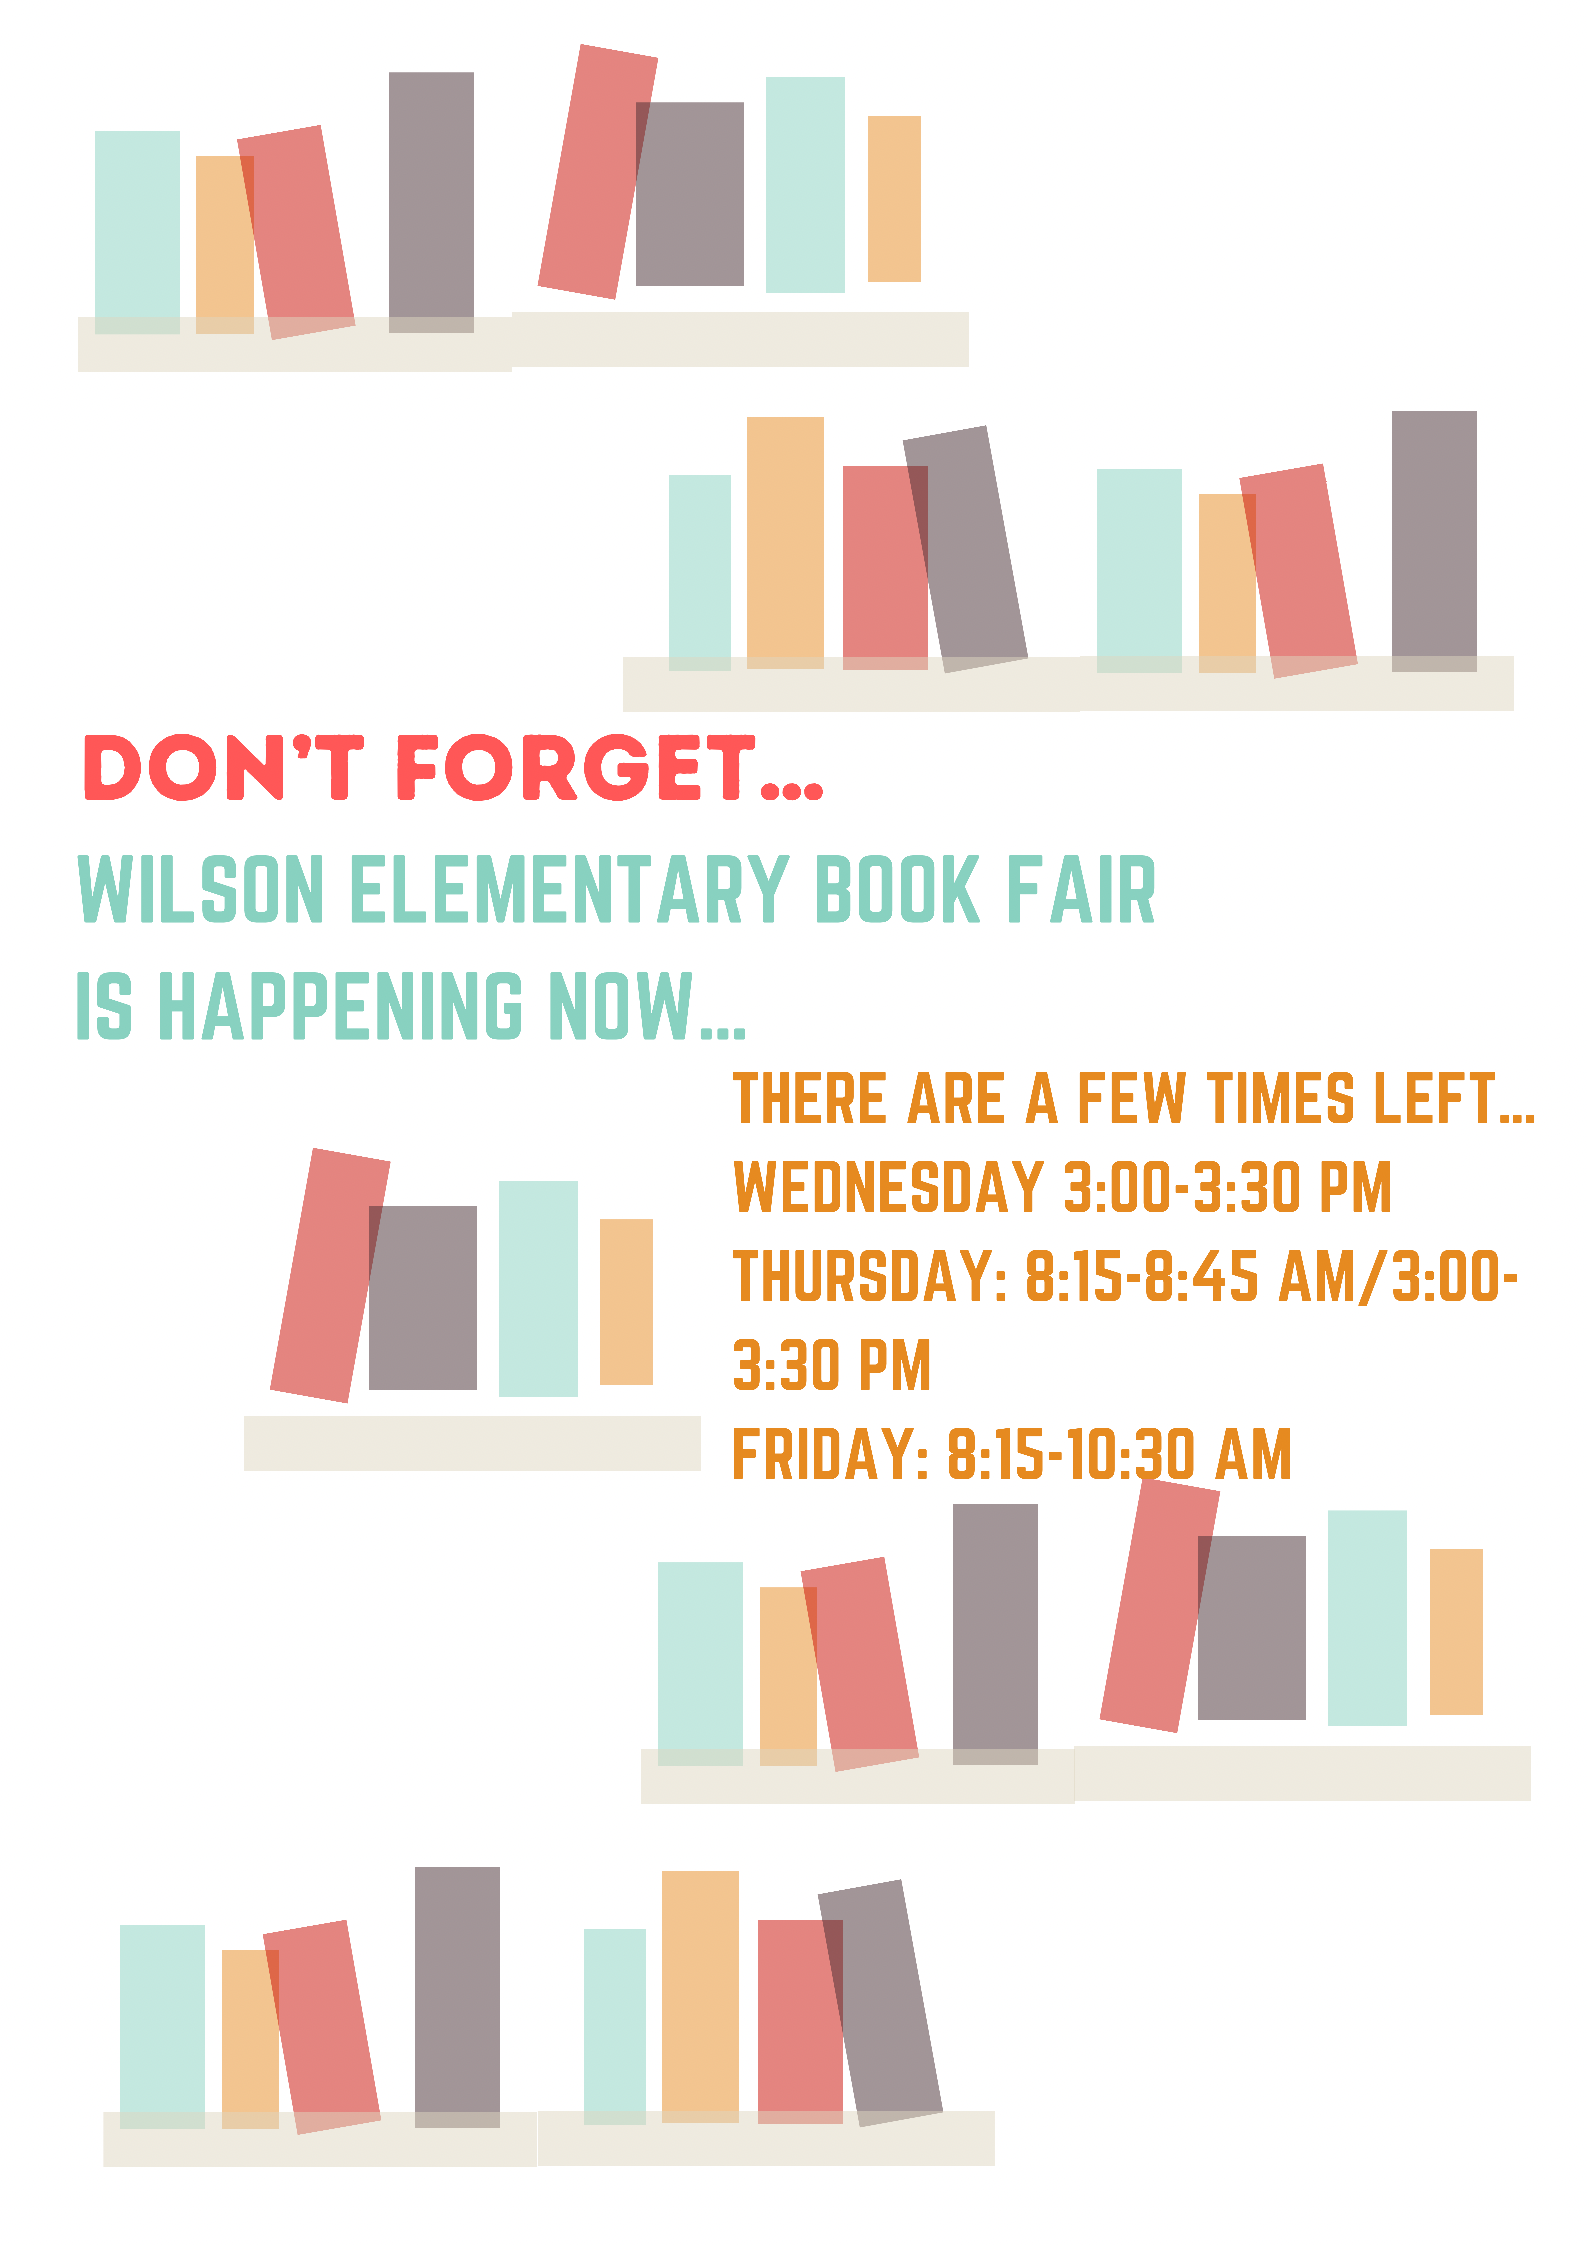 Wilson Fall Book Fair will continue the rest of this week, September 15th-17th. Hours Wed. 3:00-3:30, Thurs. 8:15-8:45 and 3:00-3:30, and Friday 8:15-10:30. 